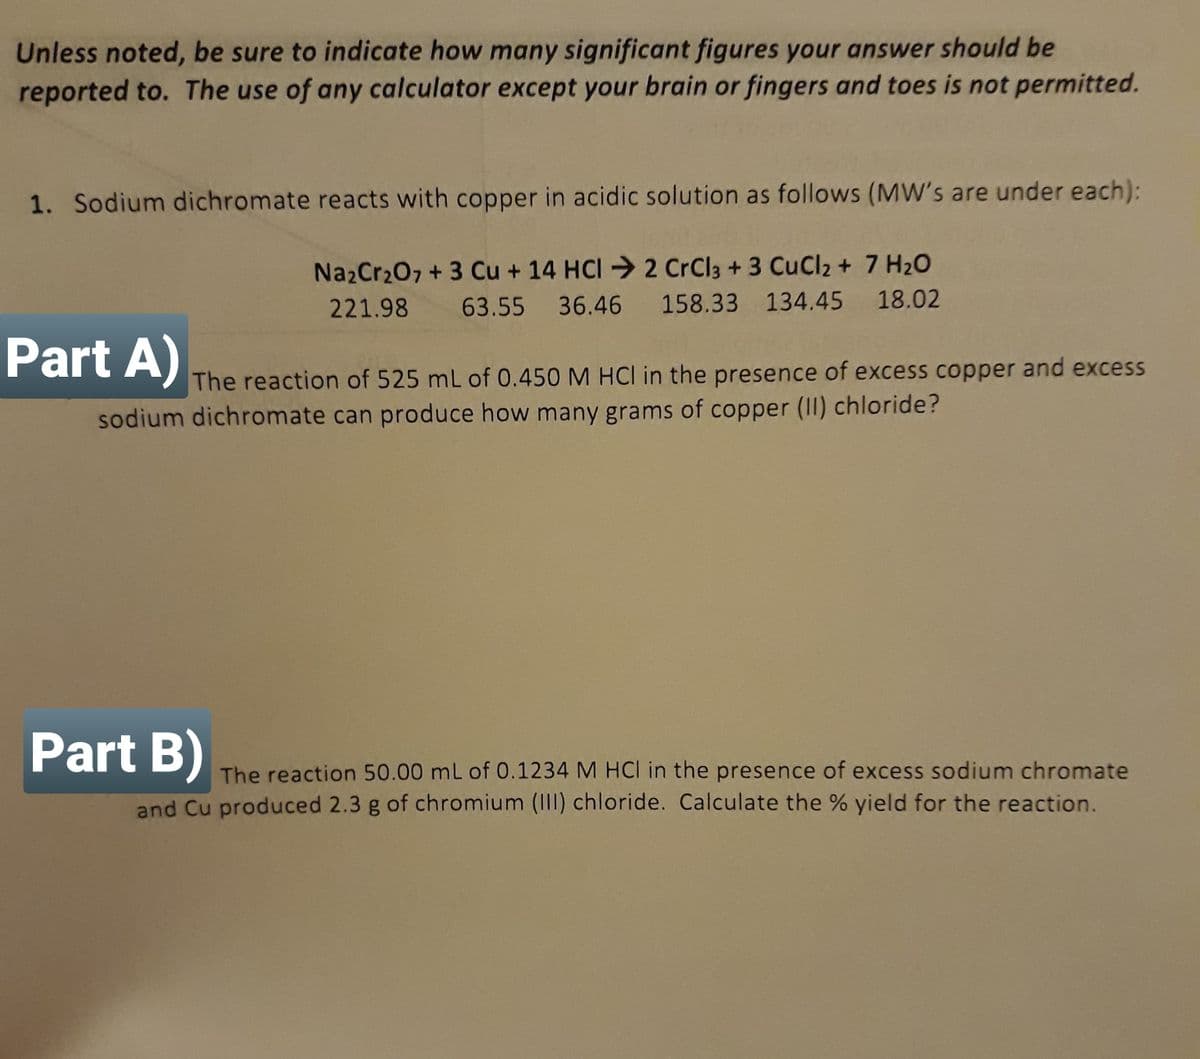 Unless noted, be sure to indicate how many significant figures your answer should be
reported to. The use of any calculator except your brain or fingers and toes is not permitted.
1. Sodium dichromate reacts with copper in acidic solution as follows (MW's are under each):
Na2Cr207 + 3 Cu + 14 HCI 2 CrCl3 + 3 CuCl2 + 7 H2O
221.98
63.55 36.46 158.33 134.45 18.02
Part A)
The reaction of 525 mL of 0.450 M HCI in the presence of excess copper and excess
sodium dichromate can produce how many grams of copper (II) chloride?
Part B)
The reaction 50.00 mL of 0.1234 M HCI in the presence of excess sodium chromate
and Cu produced 2.3 g of chromium (III) chloride. Calculate the % yield for the reaction.
